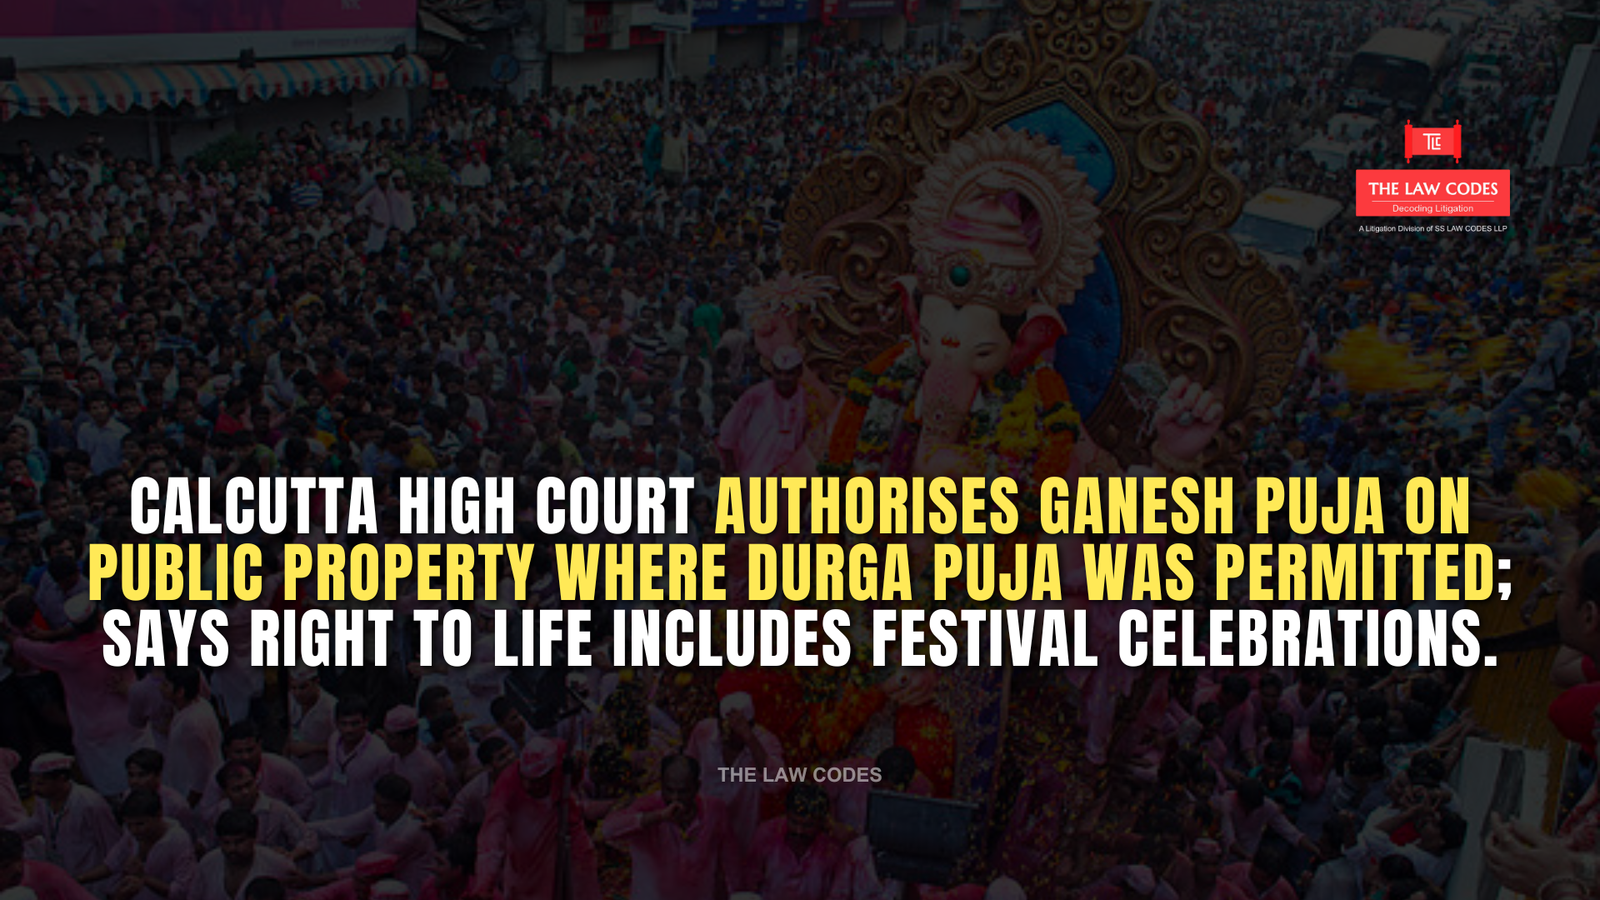 Calcutta High Court authorises Ganesh Puja on public property where Durga Puja was permitted; says right to life includes festival celebrations.